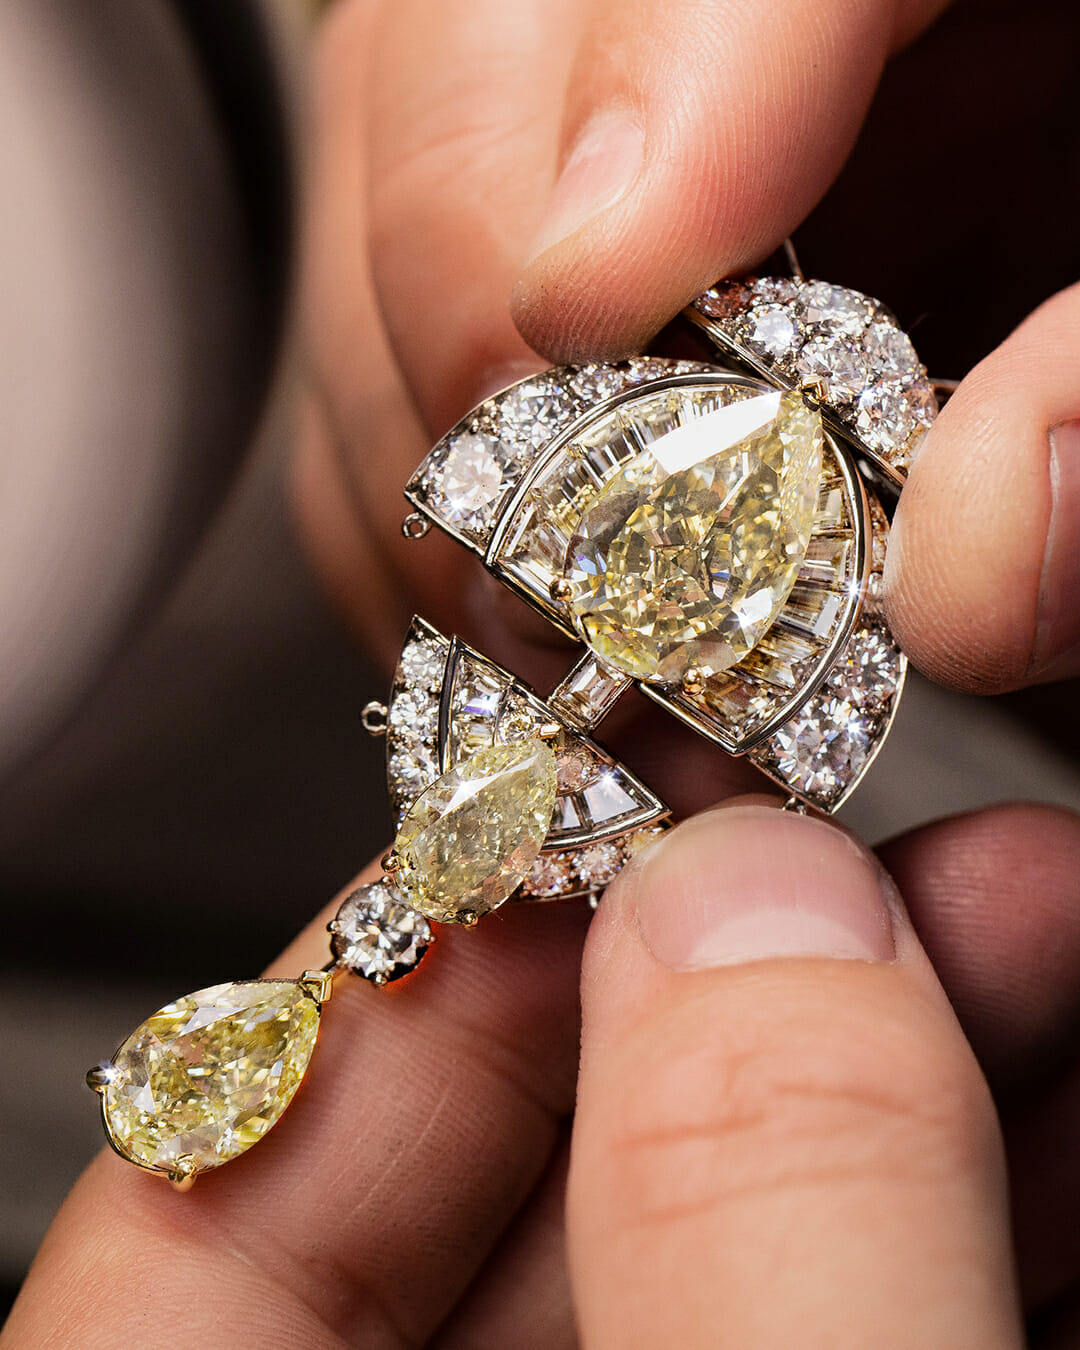 Fabulous treasures in Graff's new collection of high-jewellery